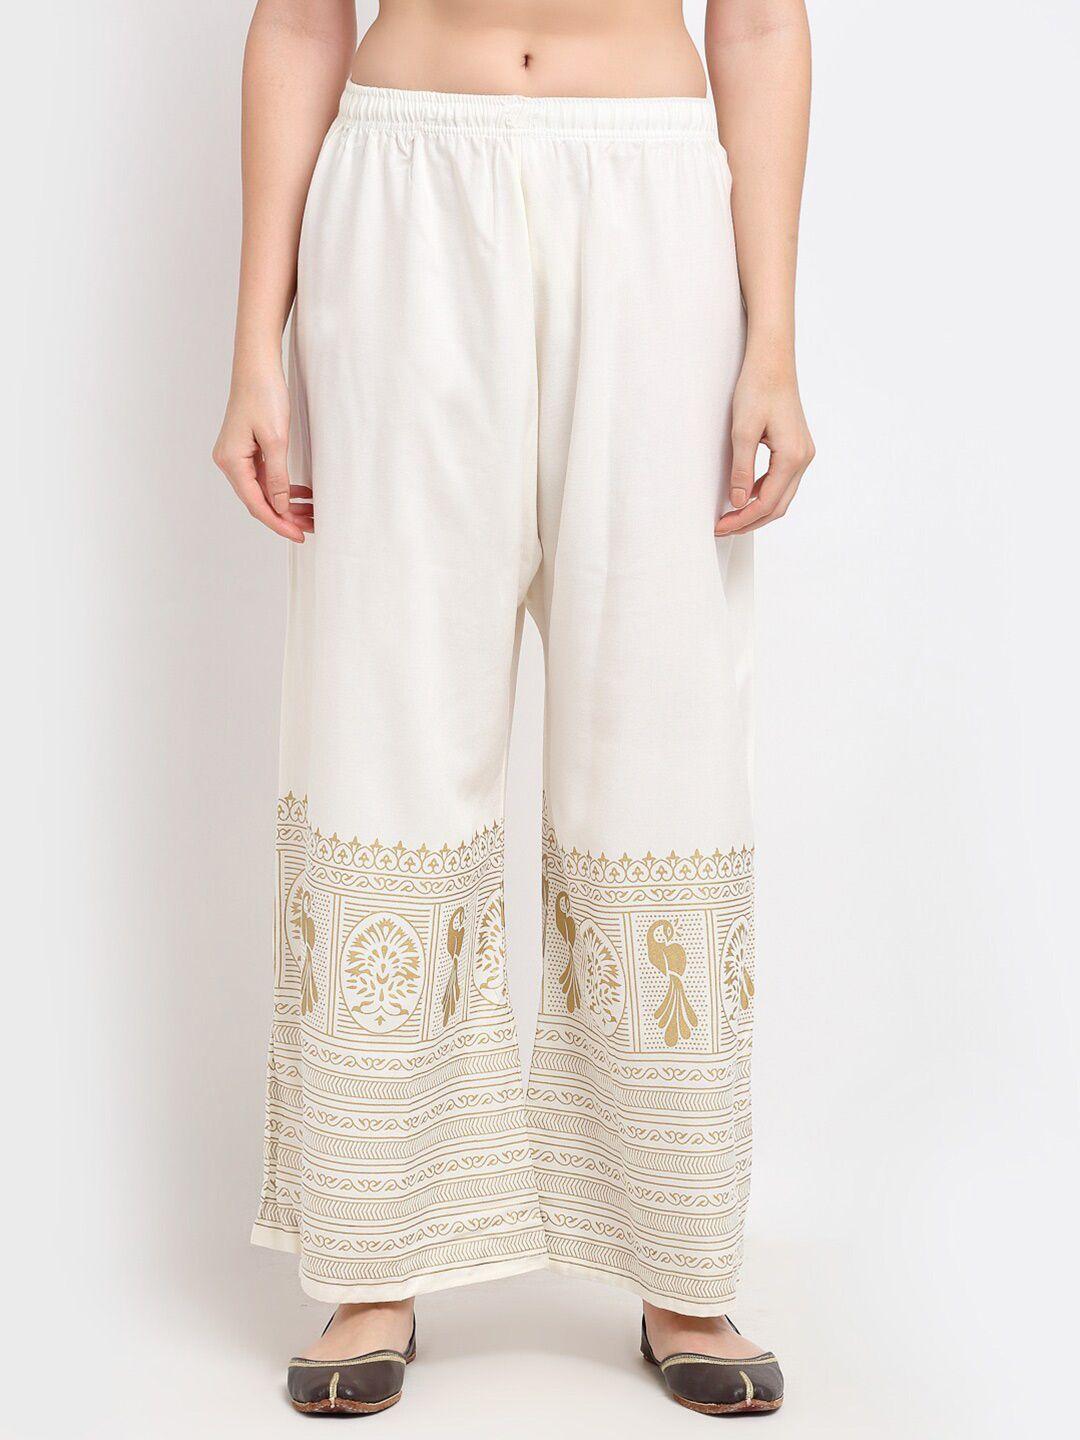 tag 7 women white & gold-toned ethnic motifs printed flared ethnic palazzos